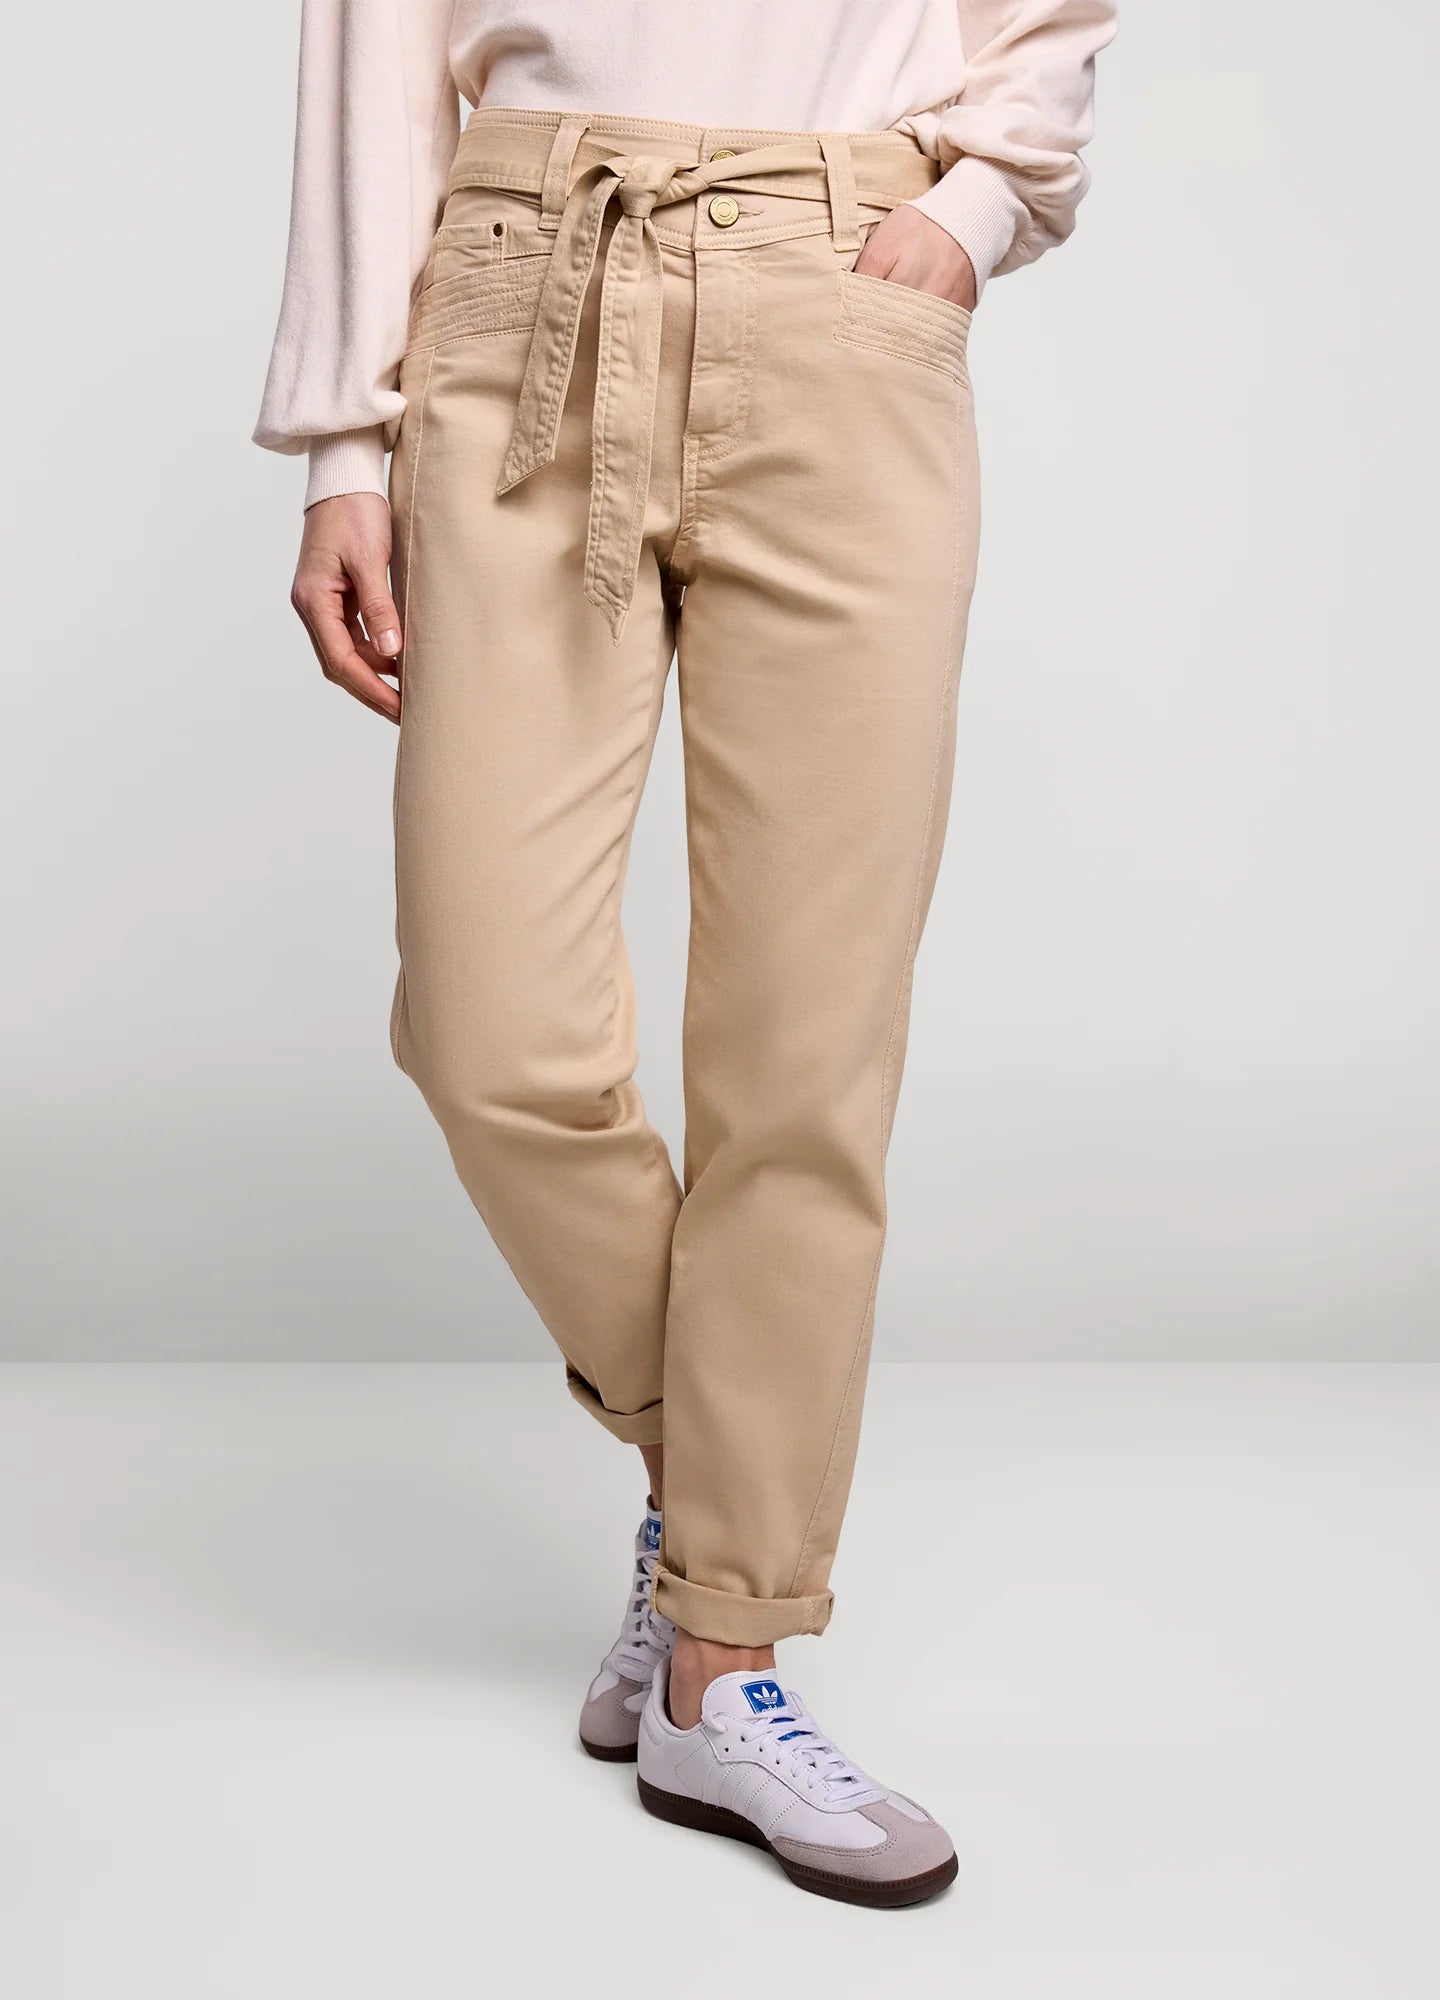 Buy BEING HUMAN Khaki Mens 5 Pocket Solid Trousers | Shoppers Stop